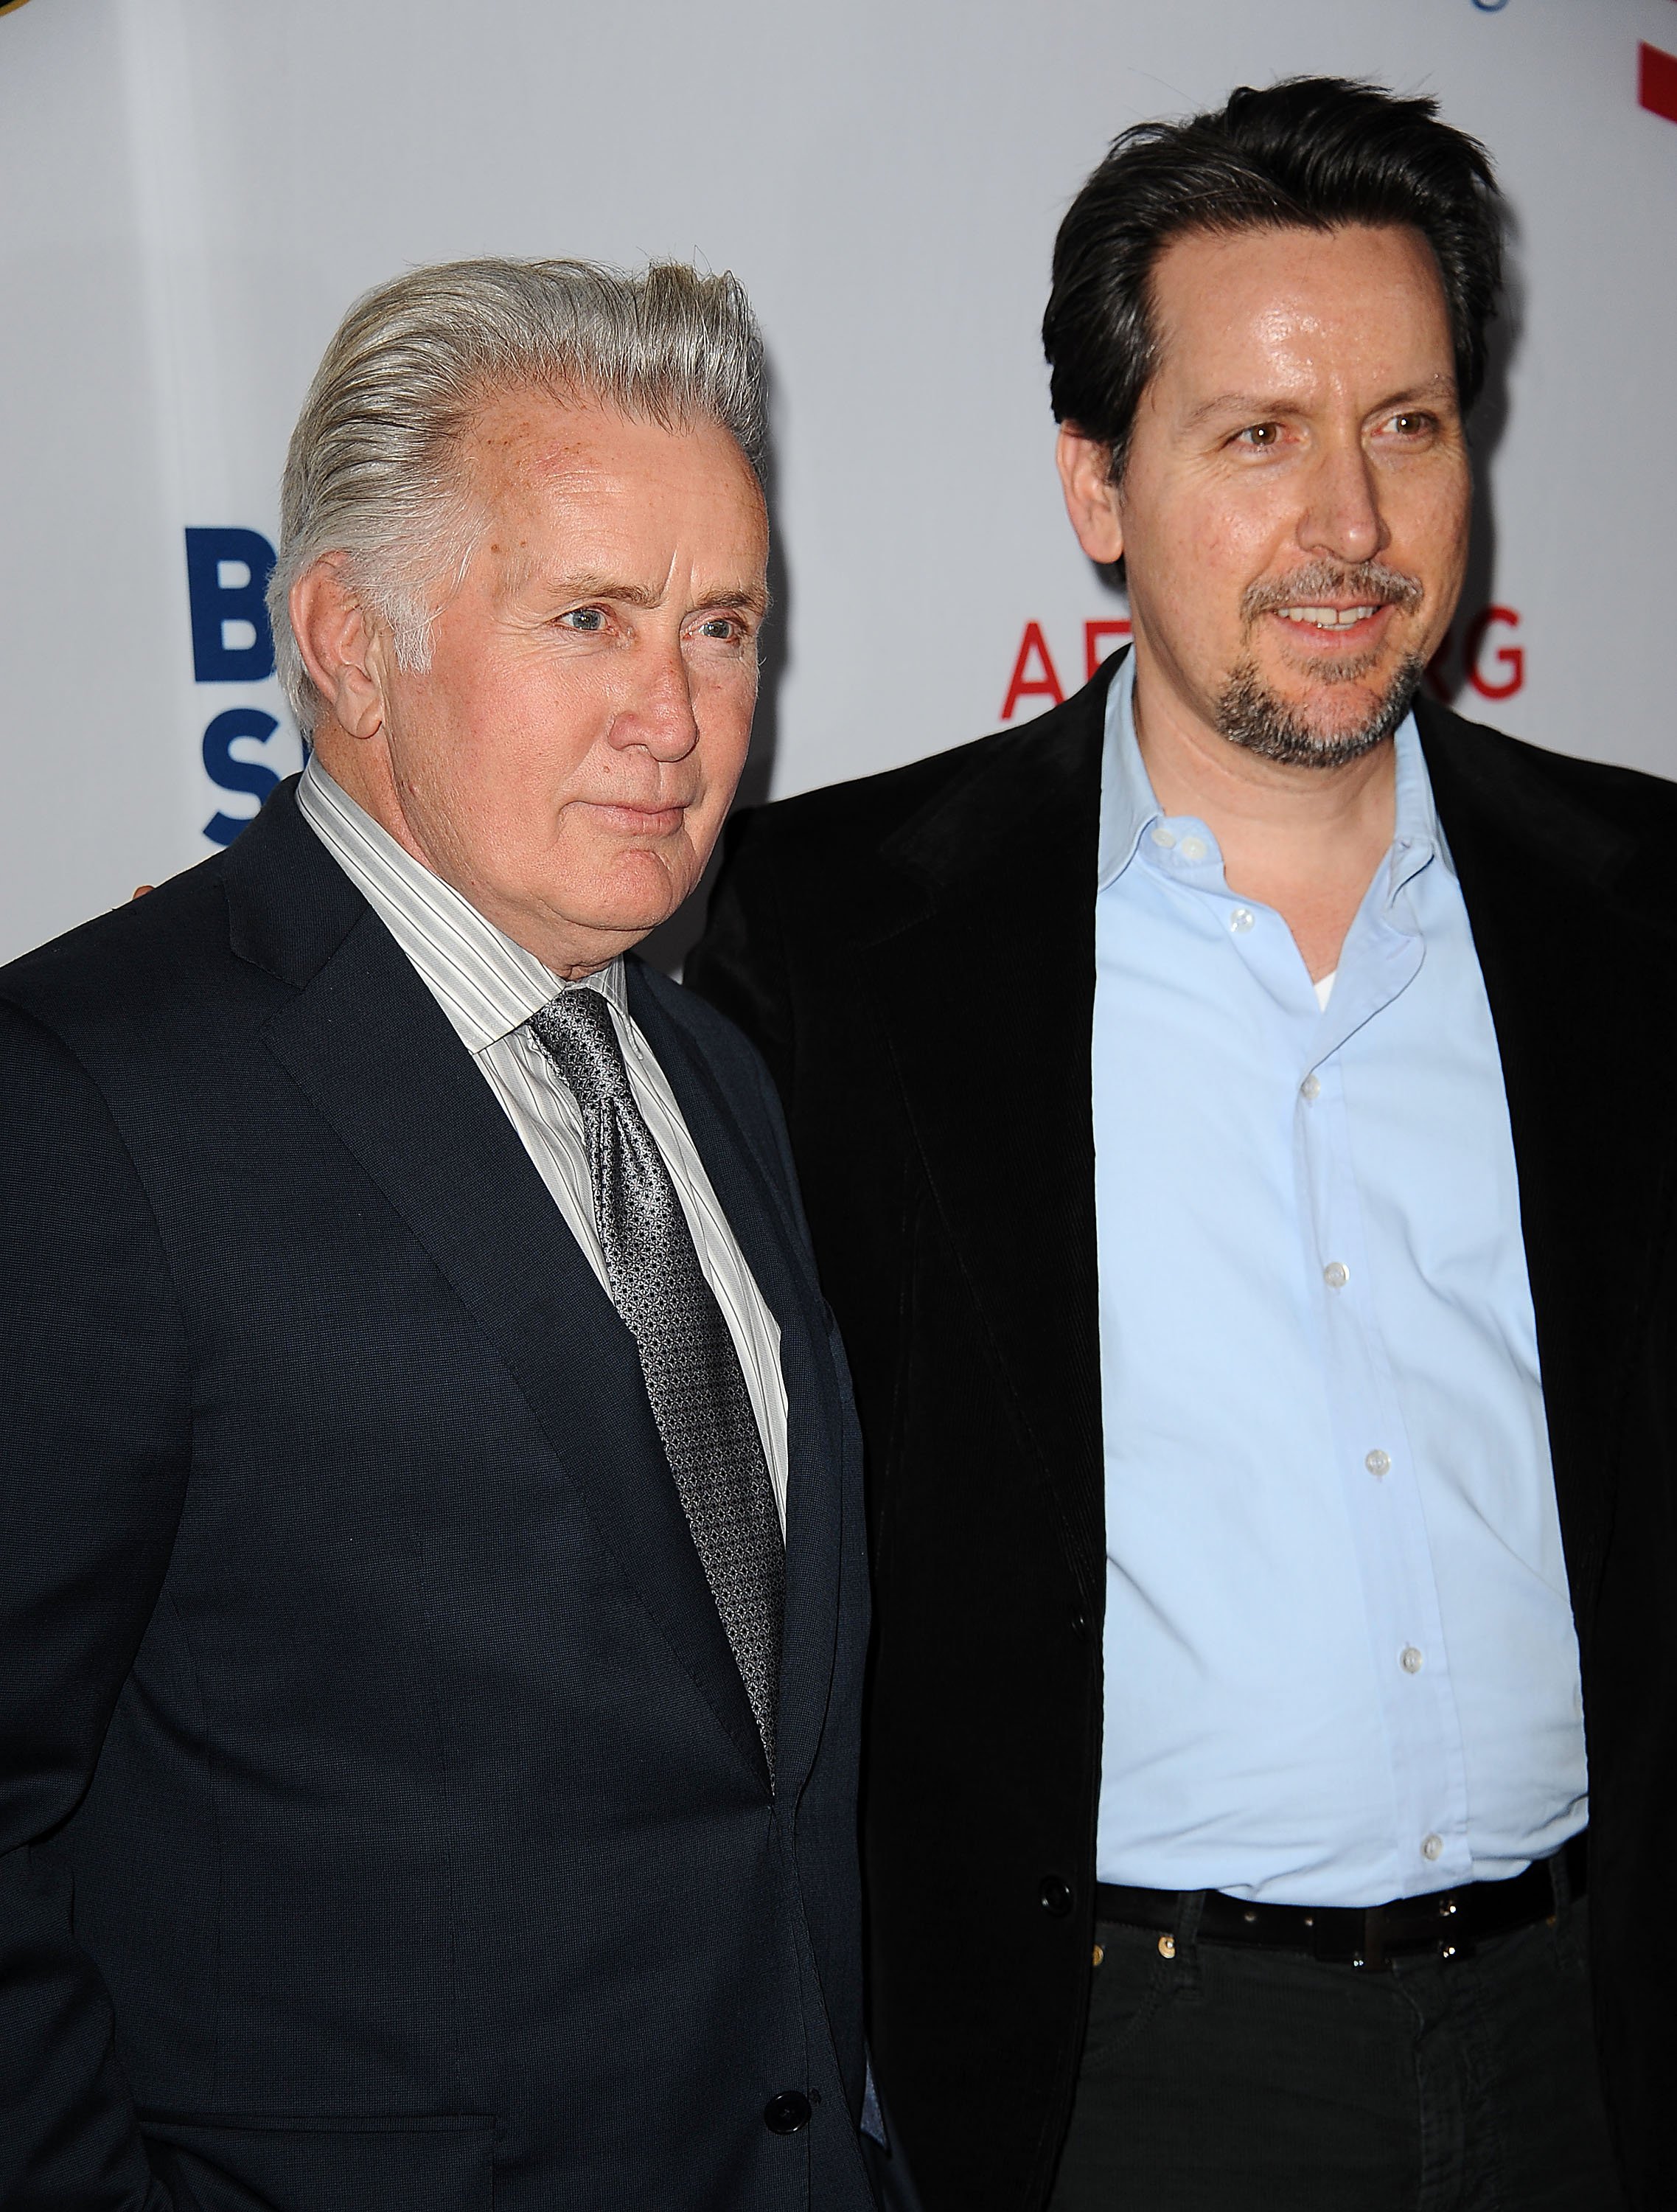 Actor Martin Sheen (L) and son Ramon Estevez attend the west coast premiere of "8" on March 3, 2012 in Los Angeles, California. | Source: Getty Images